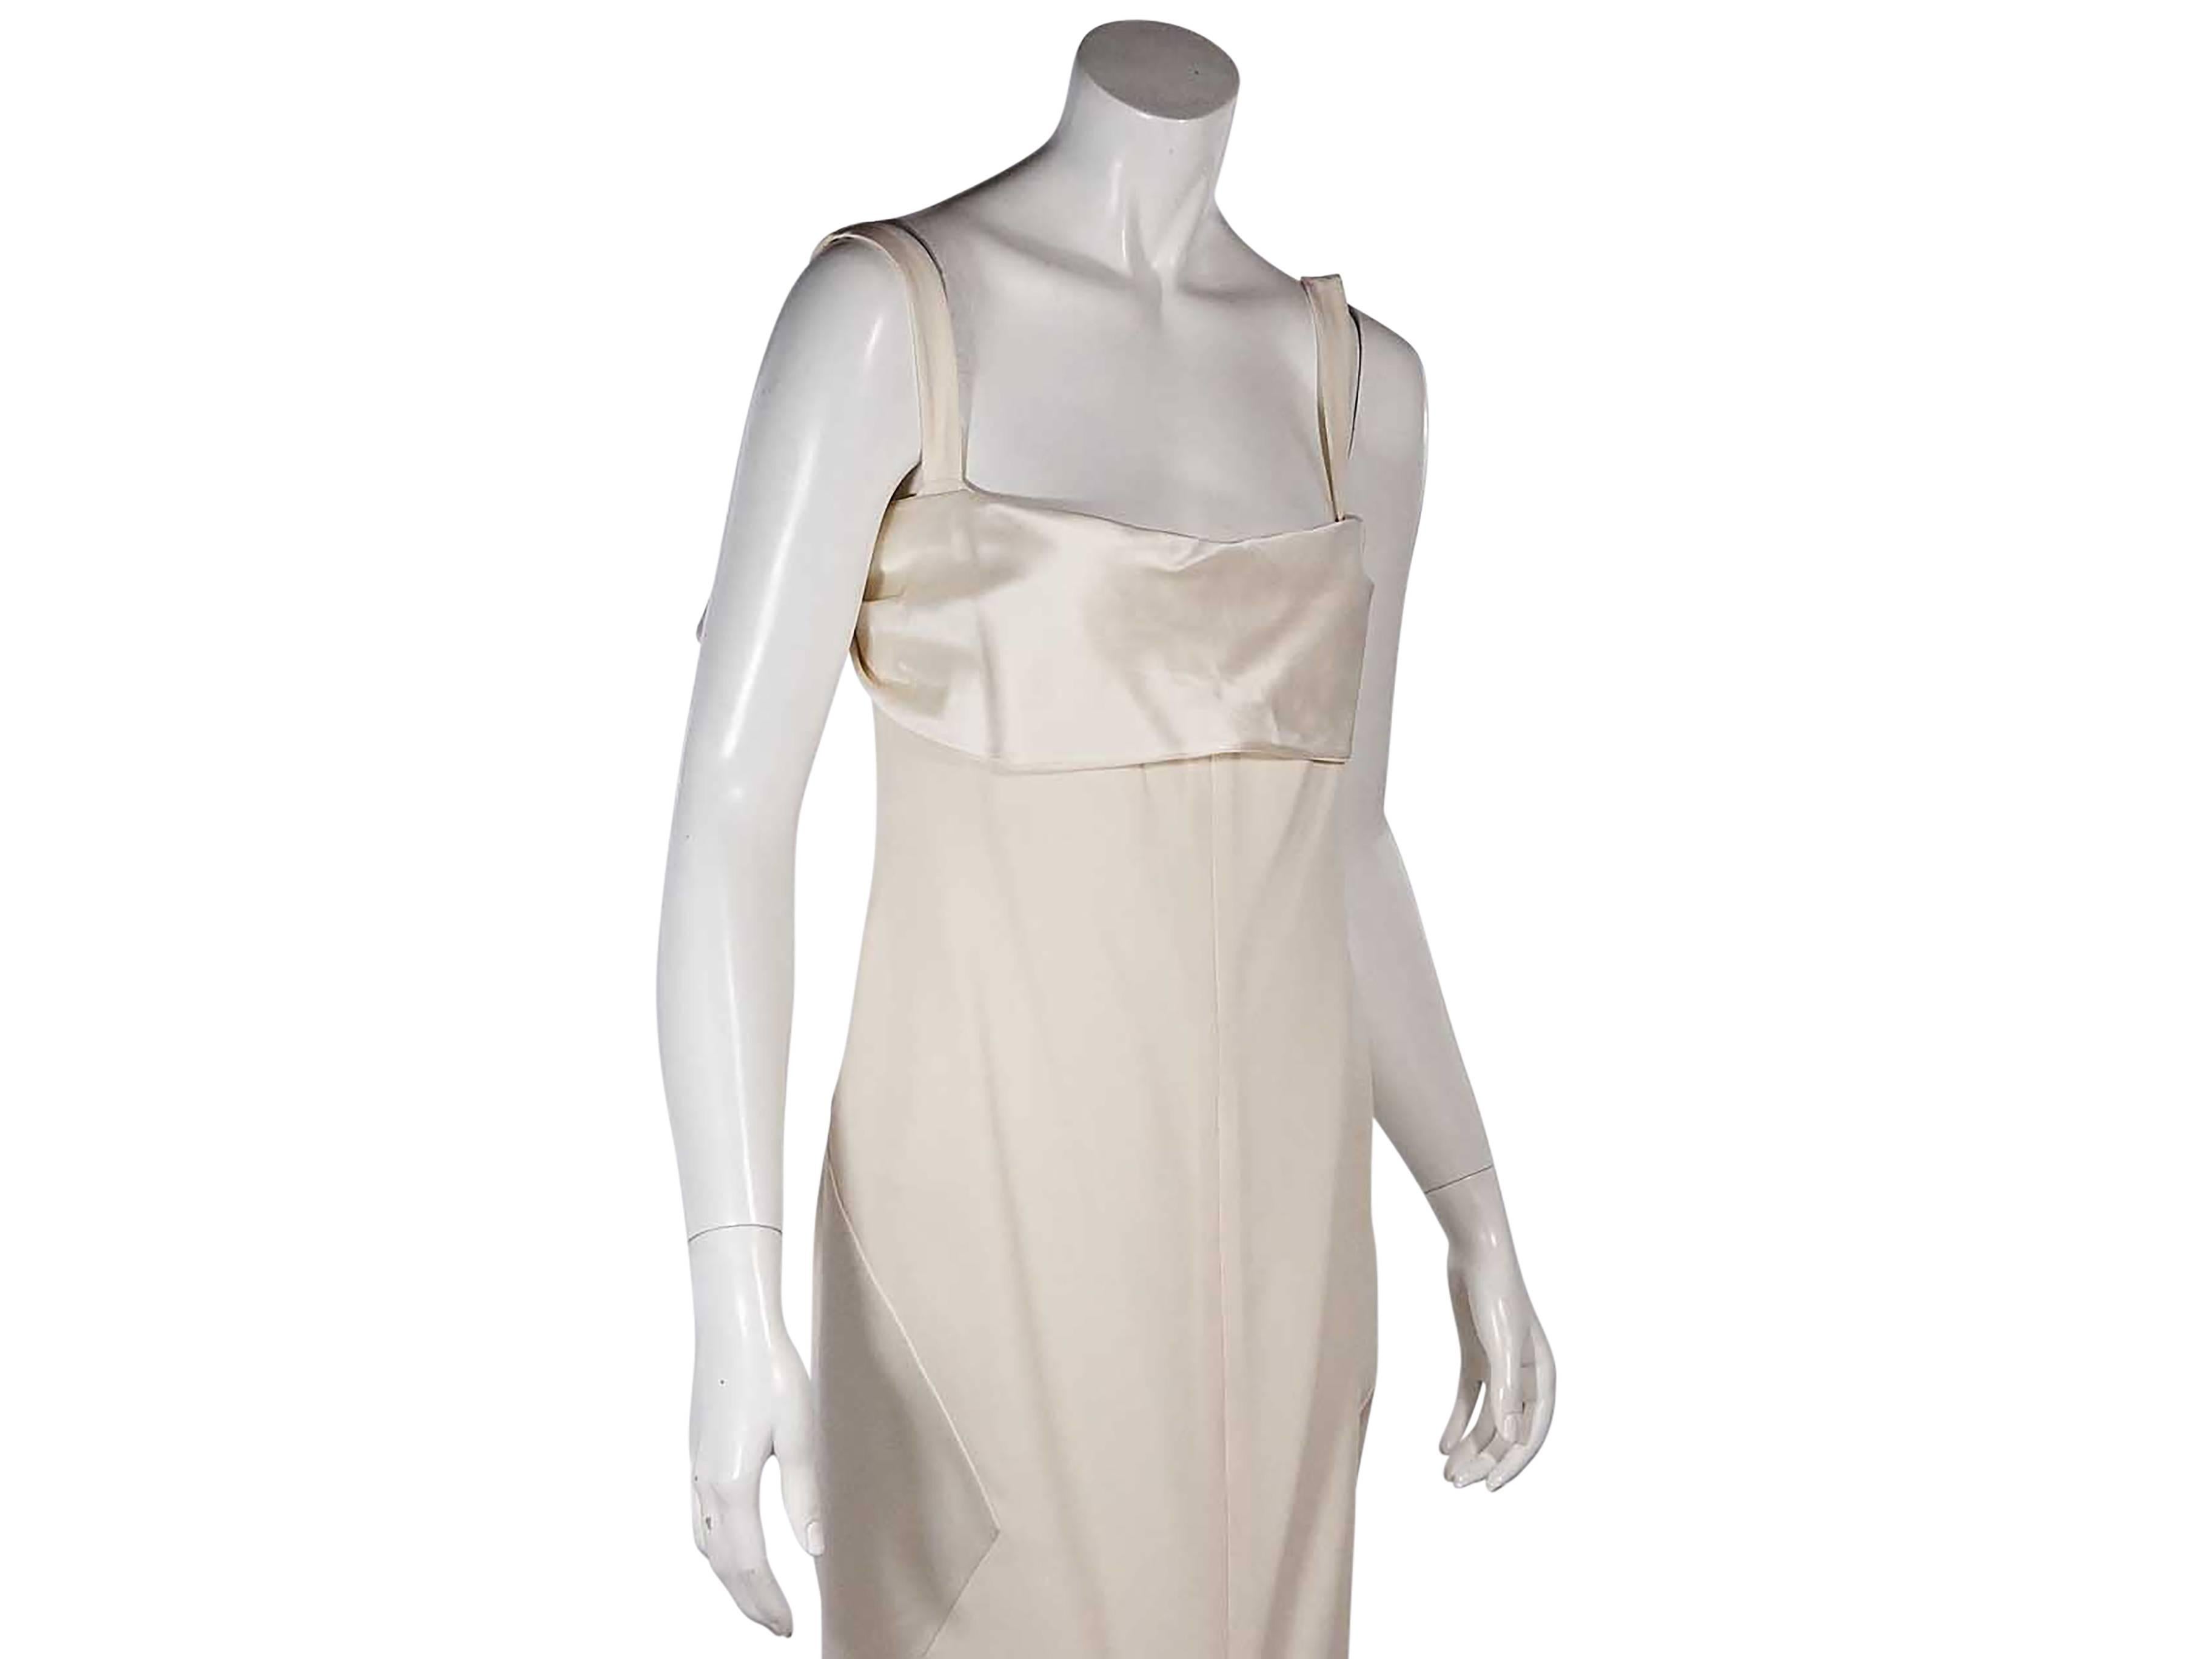 Product details:  Ivory silk Empire waist dress by Valentino.  Sleeveless.  Scoopneck.  Back draped flap.  Concealed back zip closure. 
Condition: New with tags. 

Est. Retail $ 3,180.00